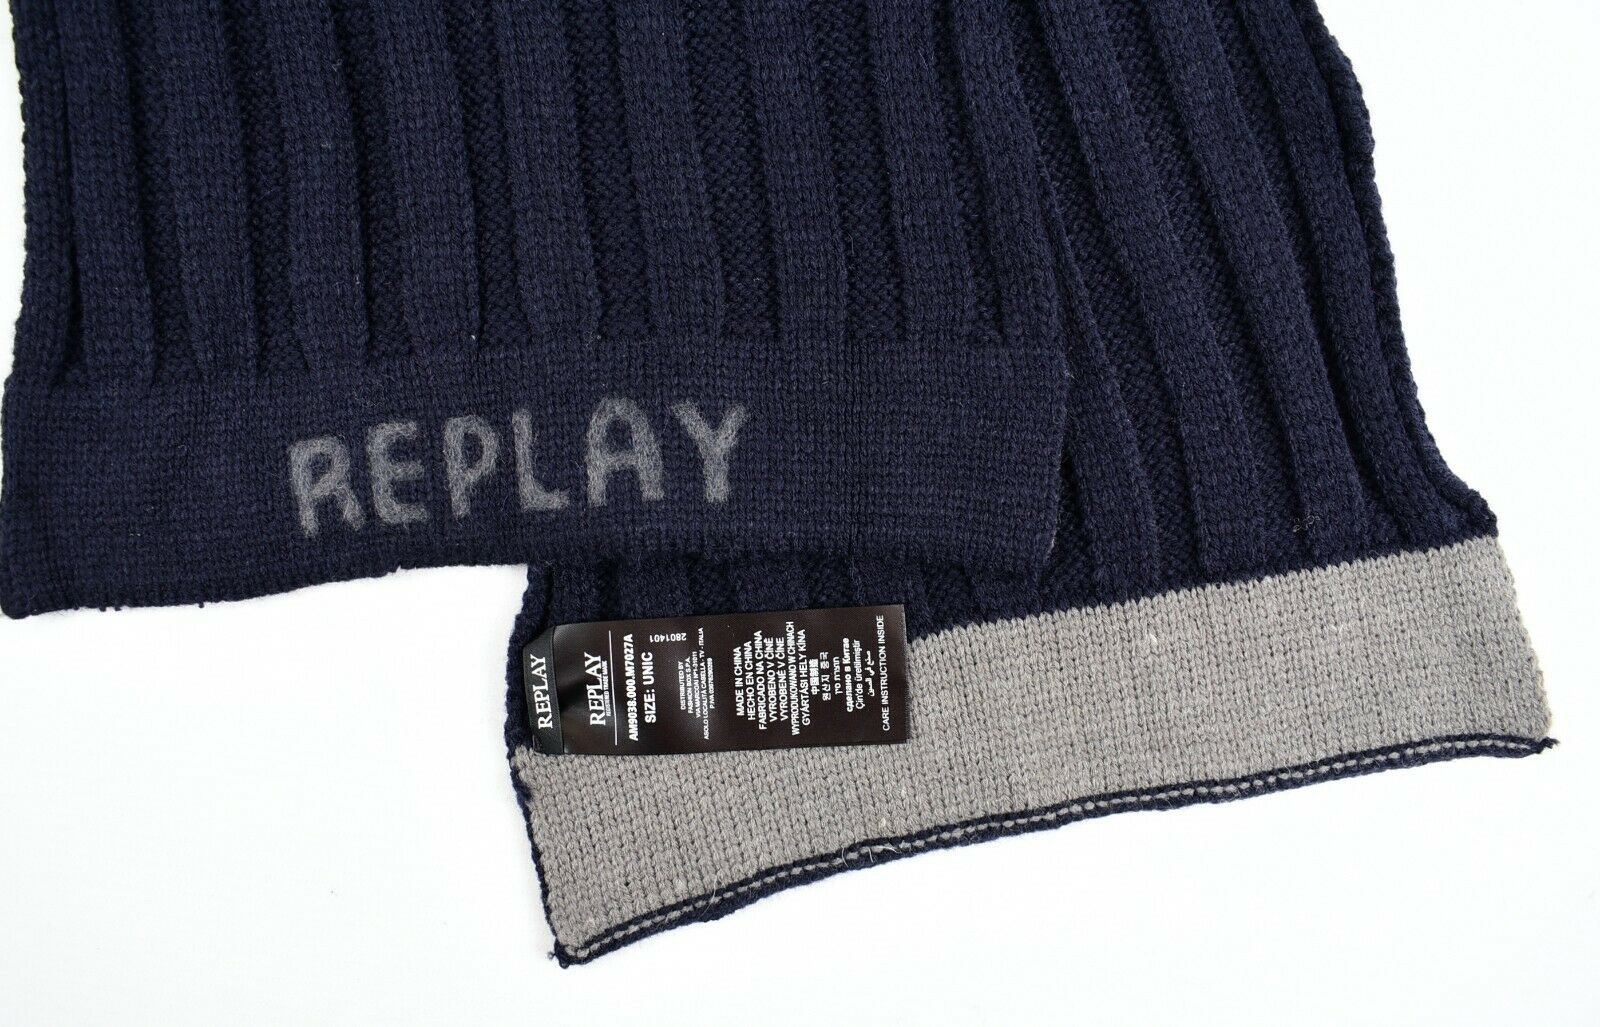 REPLAY Men's Navy Blue Rib Knit Scarf, Acrylic /Wool Blend, Gift Boxed